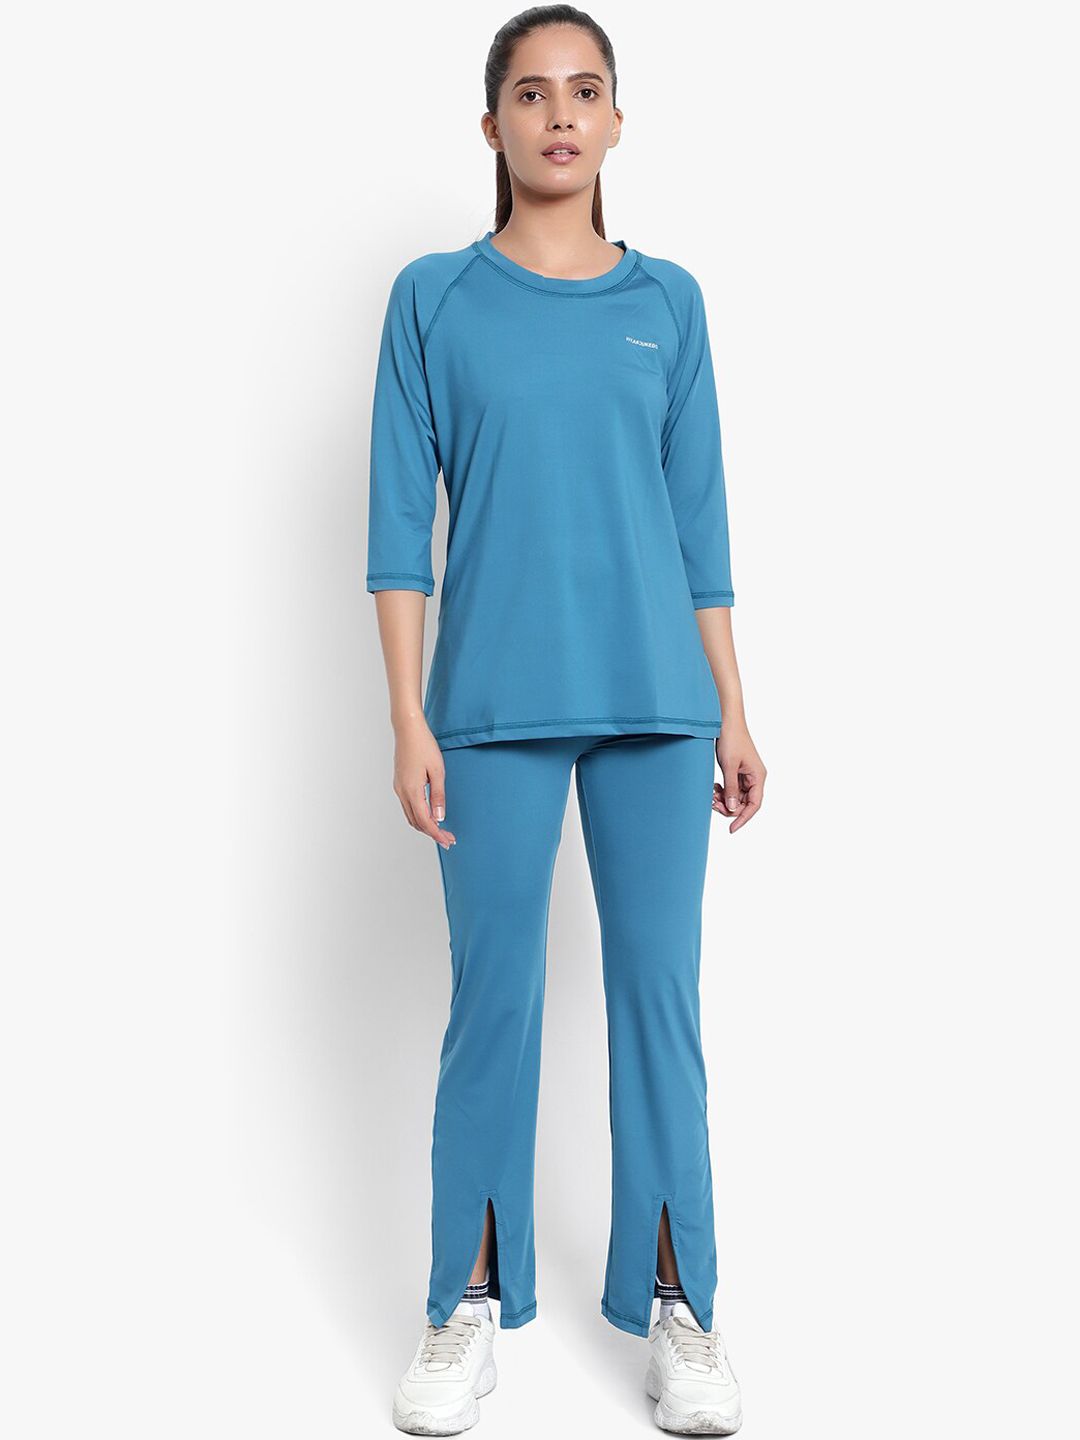 Wearjukebox Women Blue Tracksuits Price in India